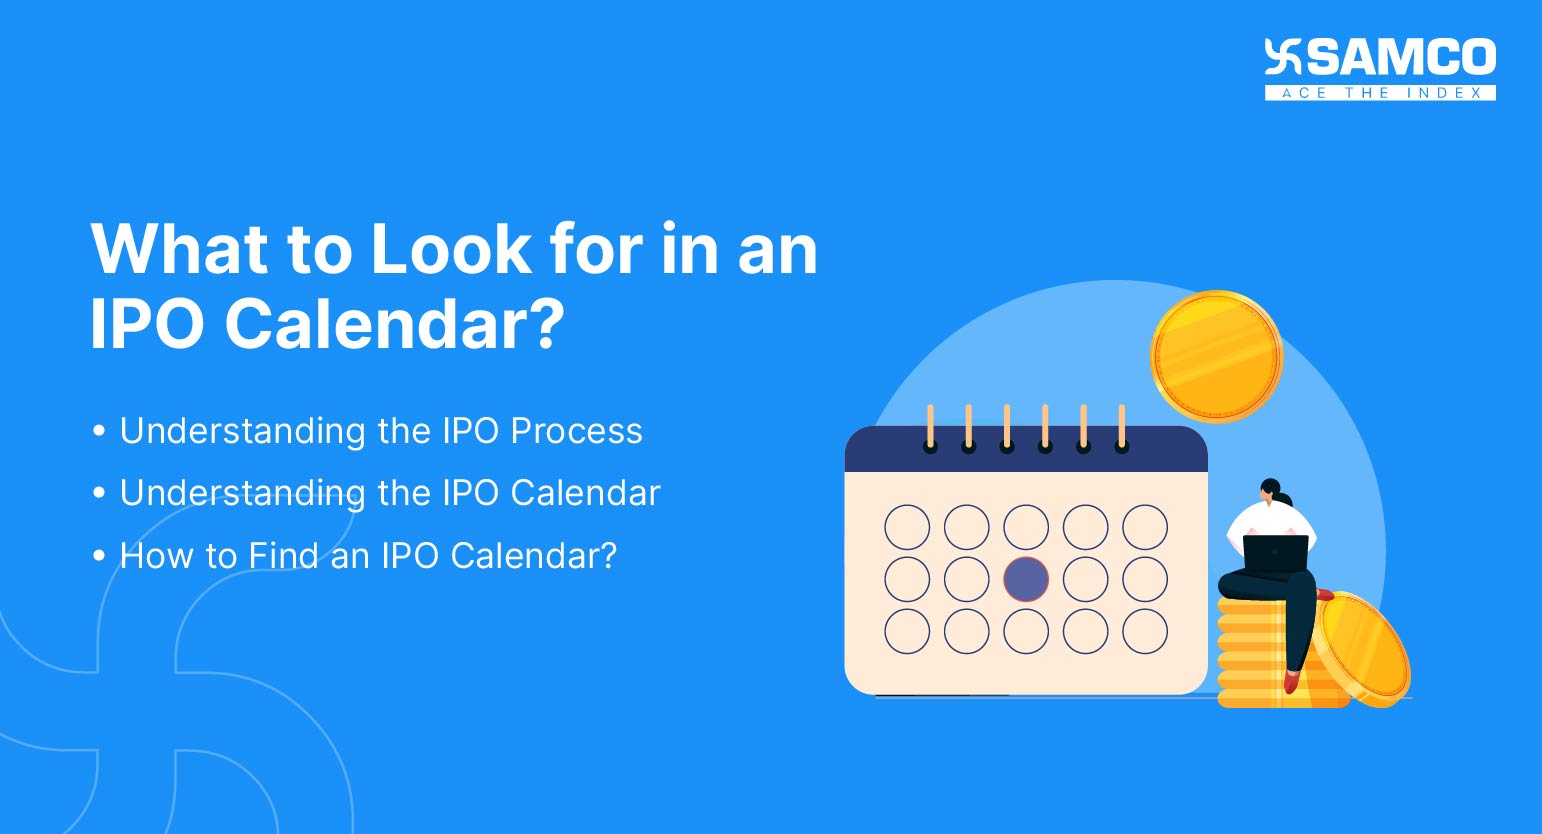 What to Look for in an IPO Calendar?